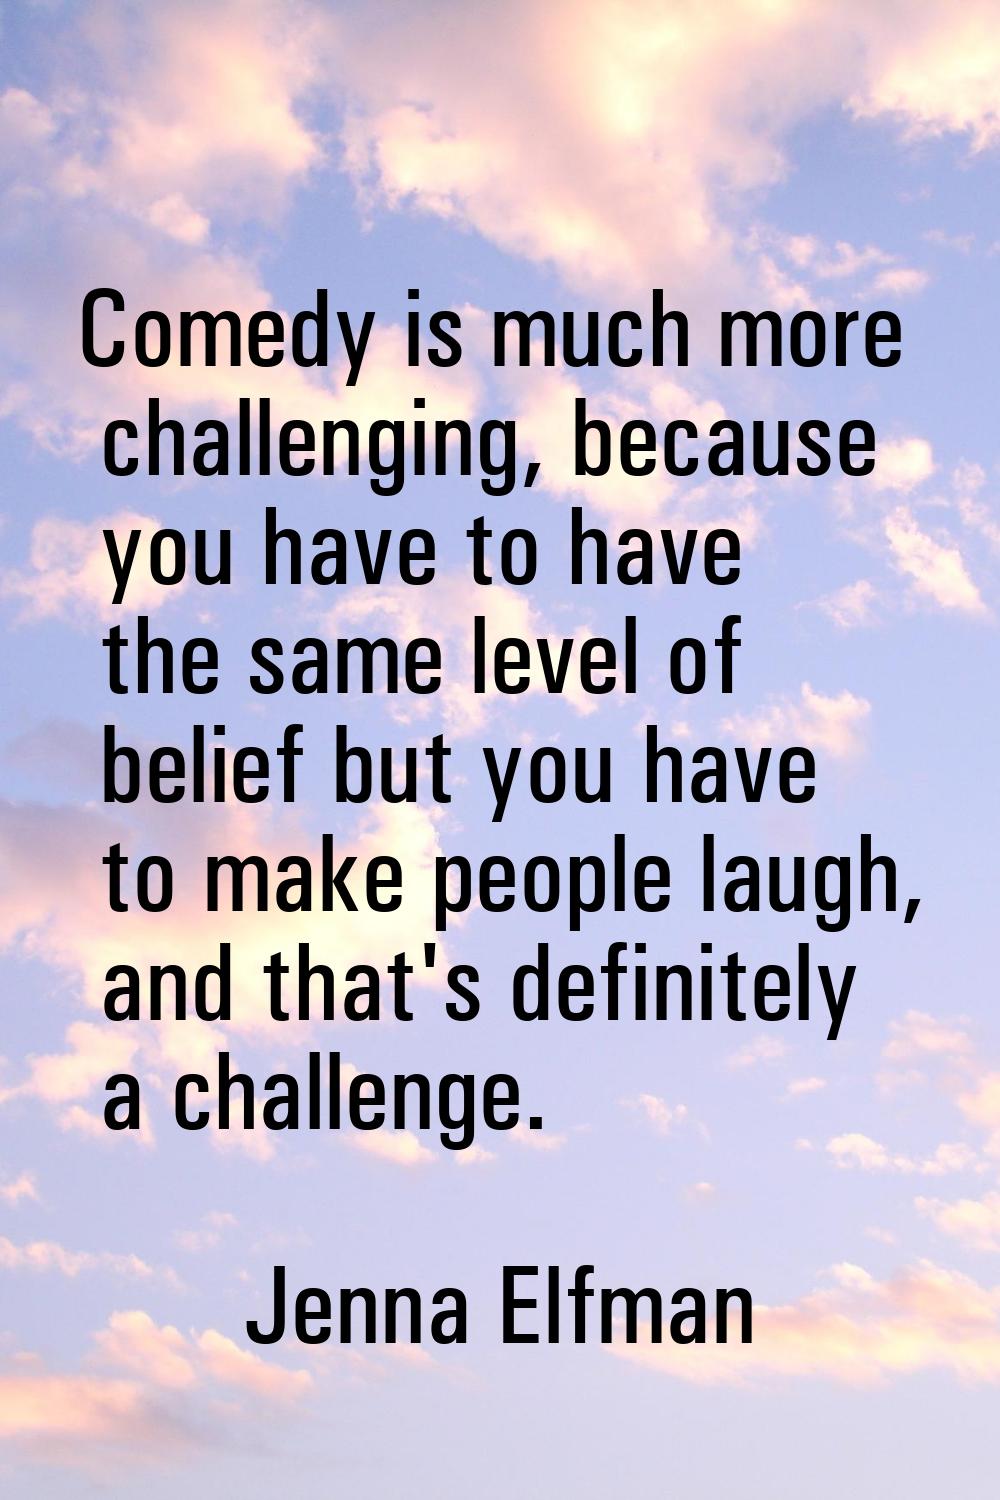 Comedy is much more challenging, because you have to have the same level of belief but you have to 